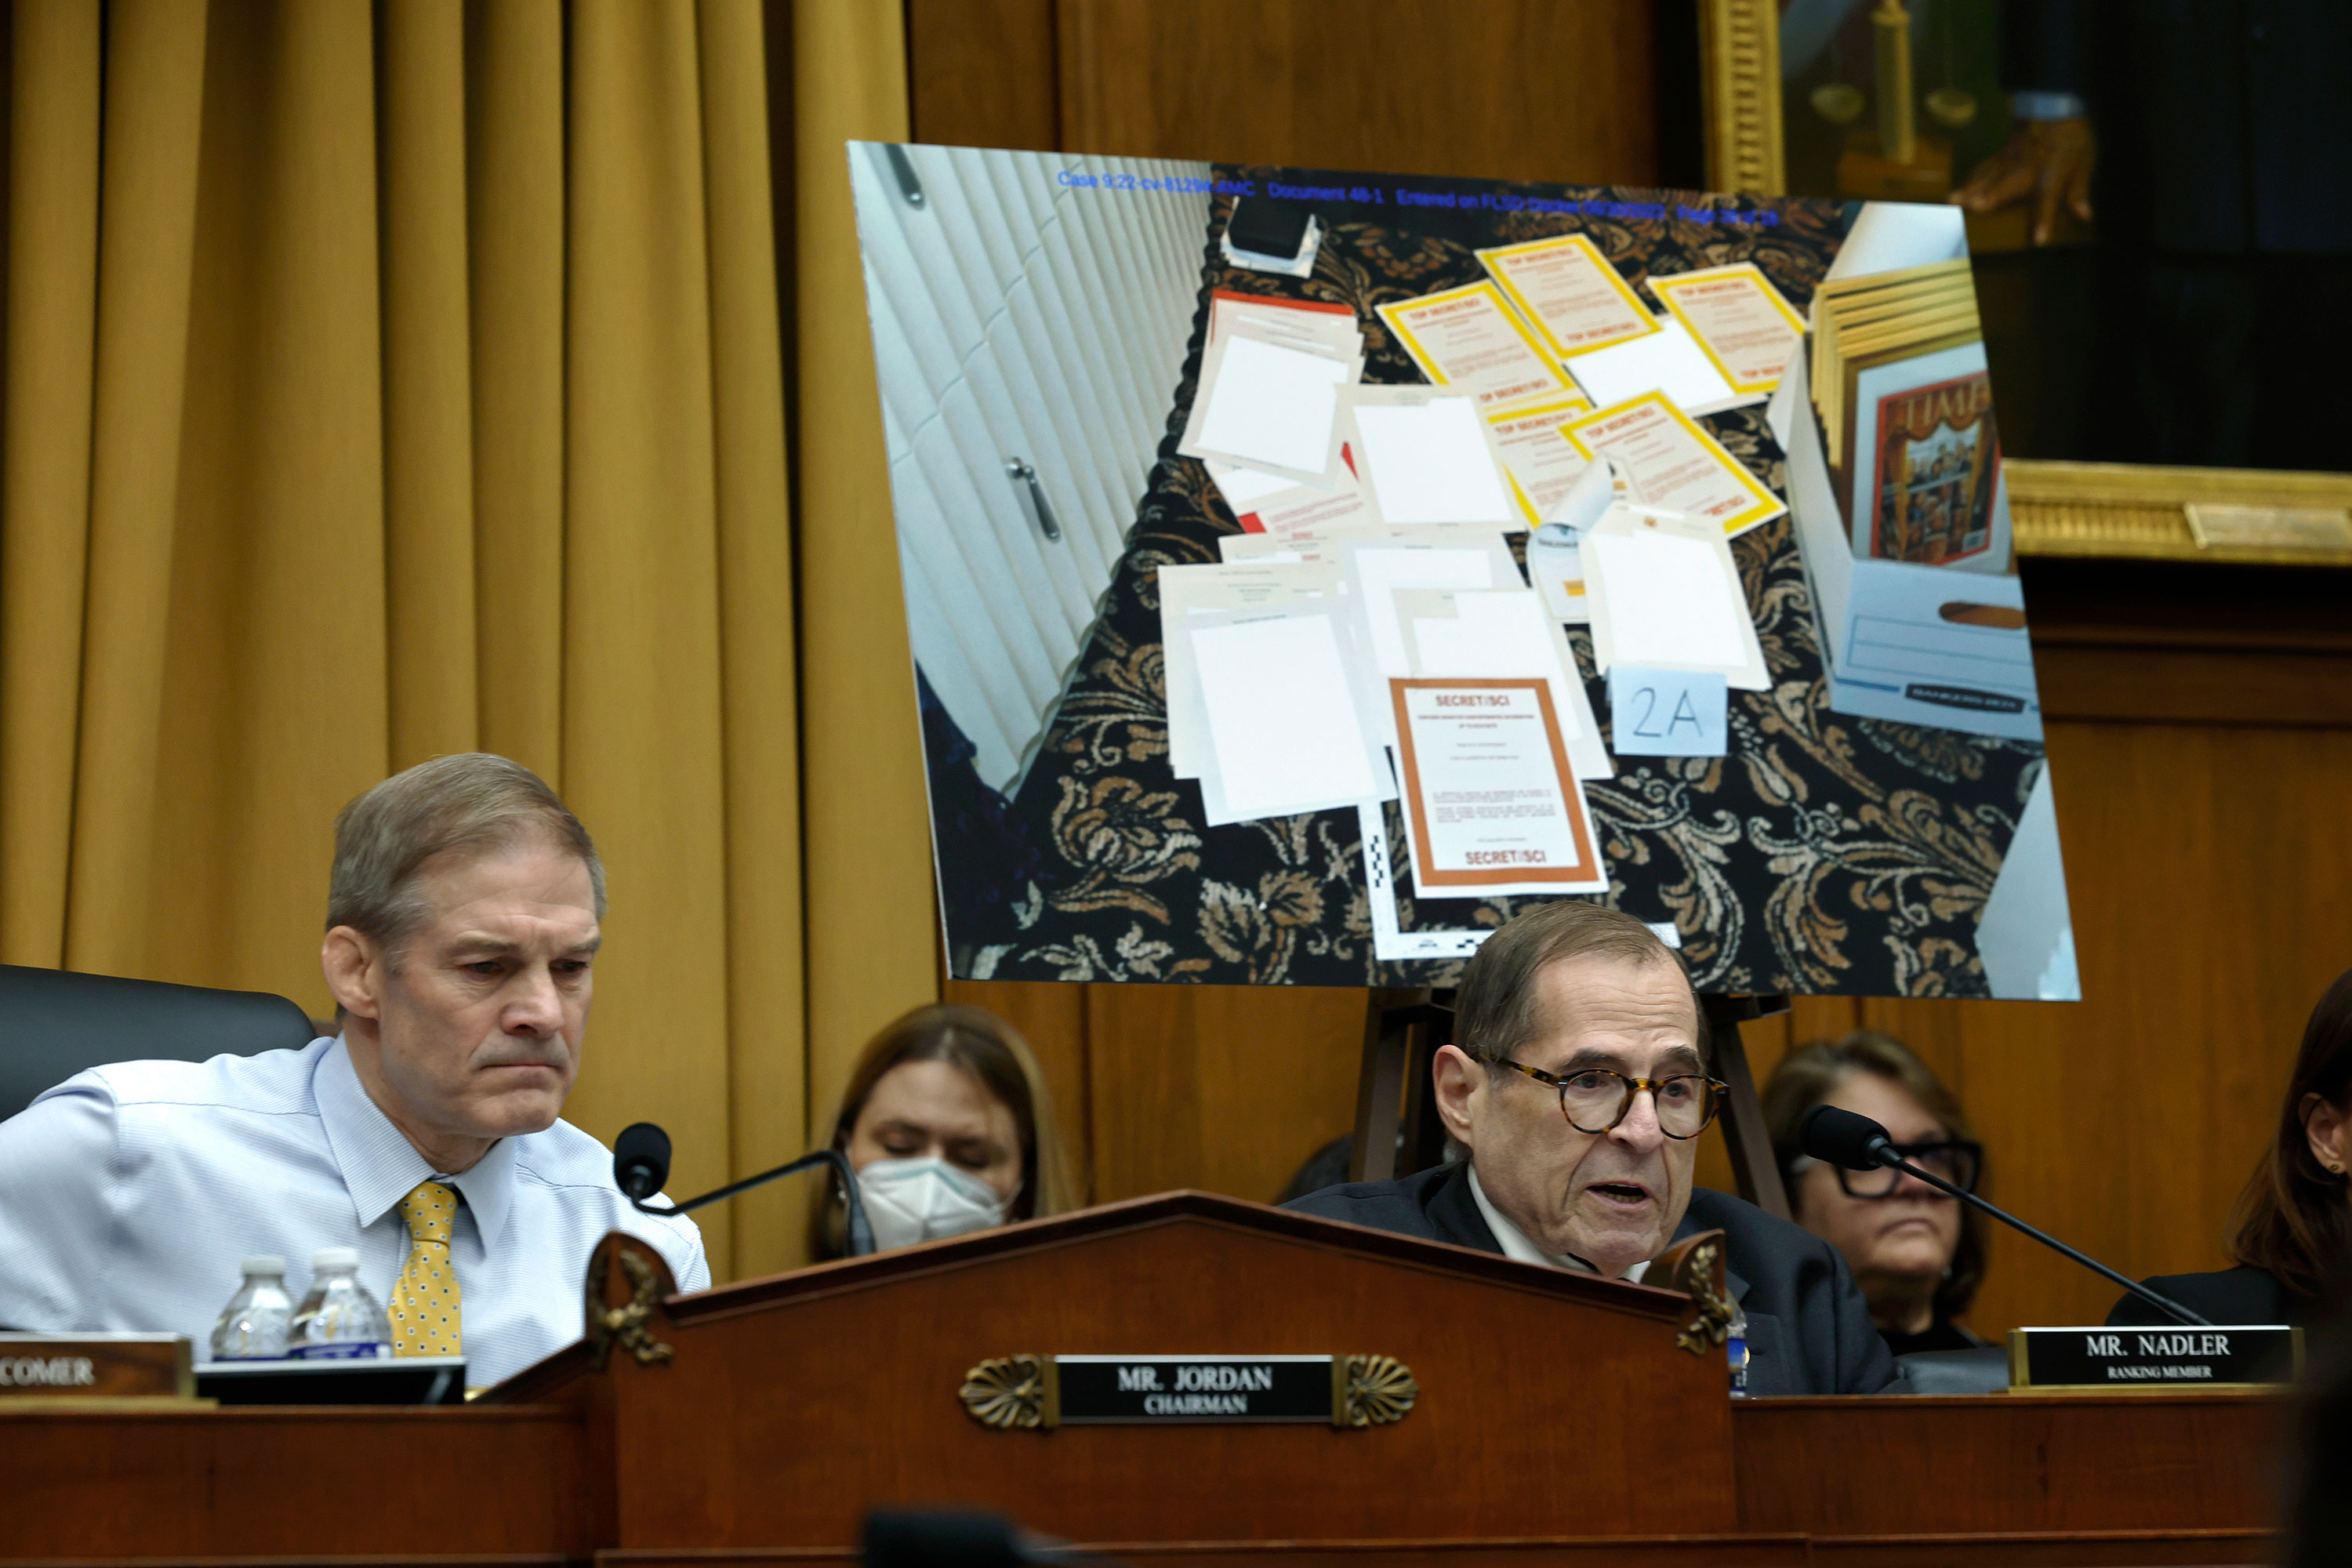 Rep. Jerry Nadler, right, speaks during the hearing on Tuesday.